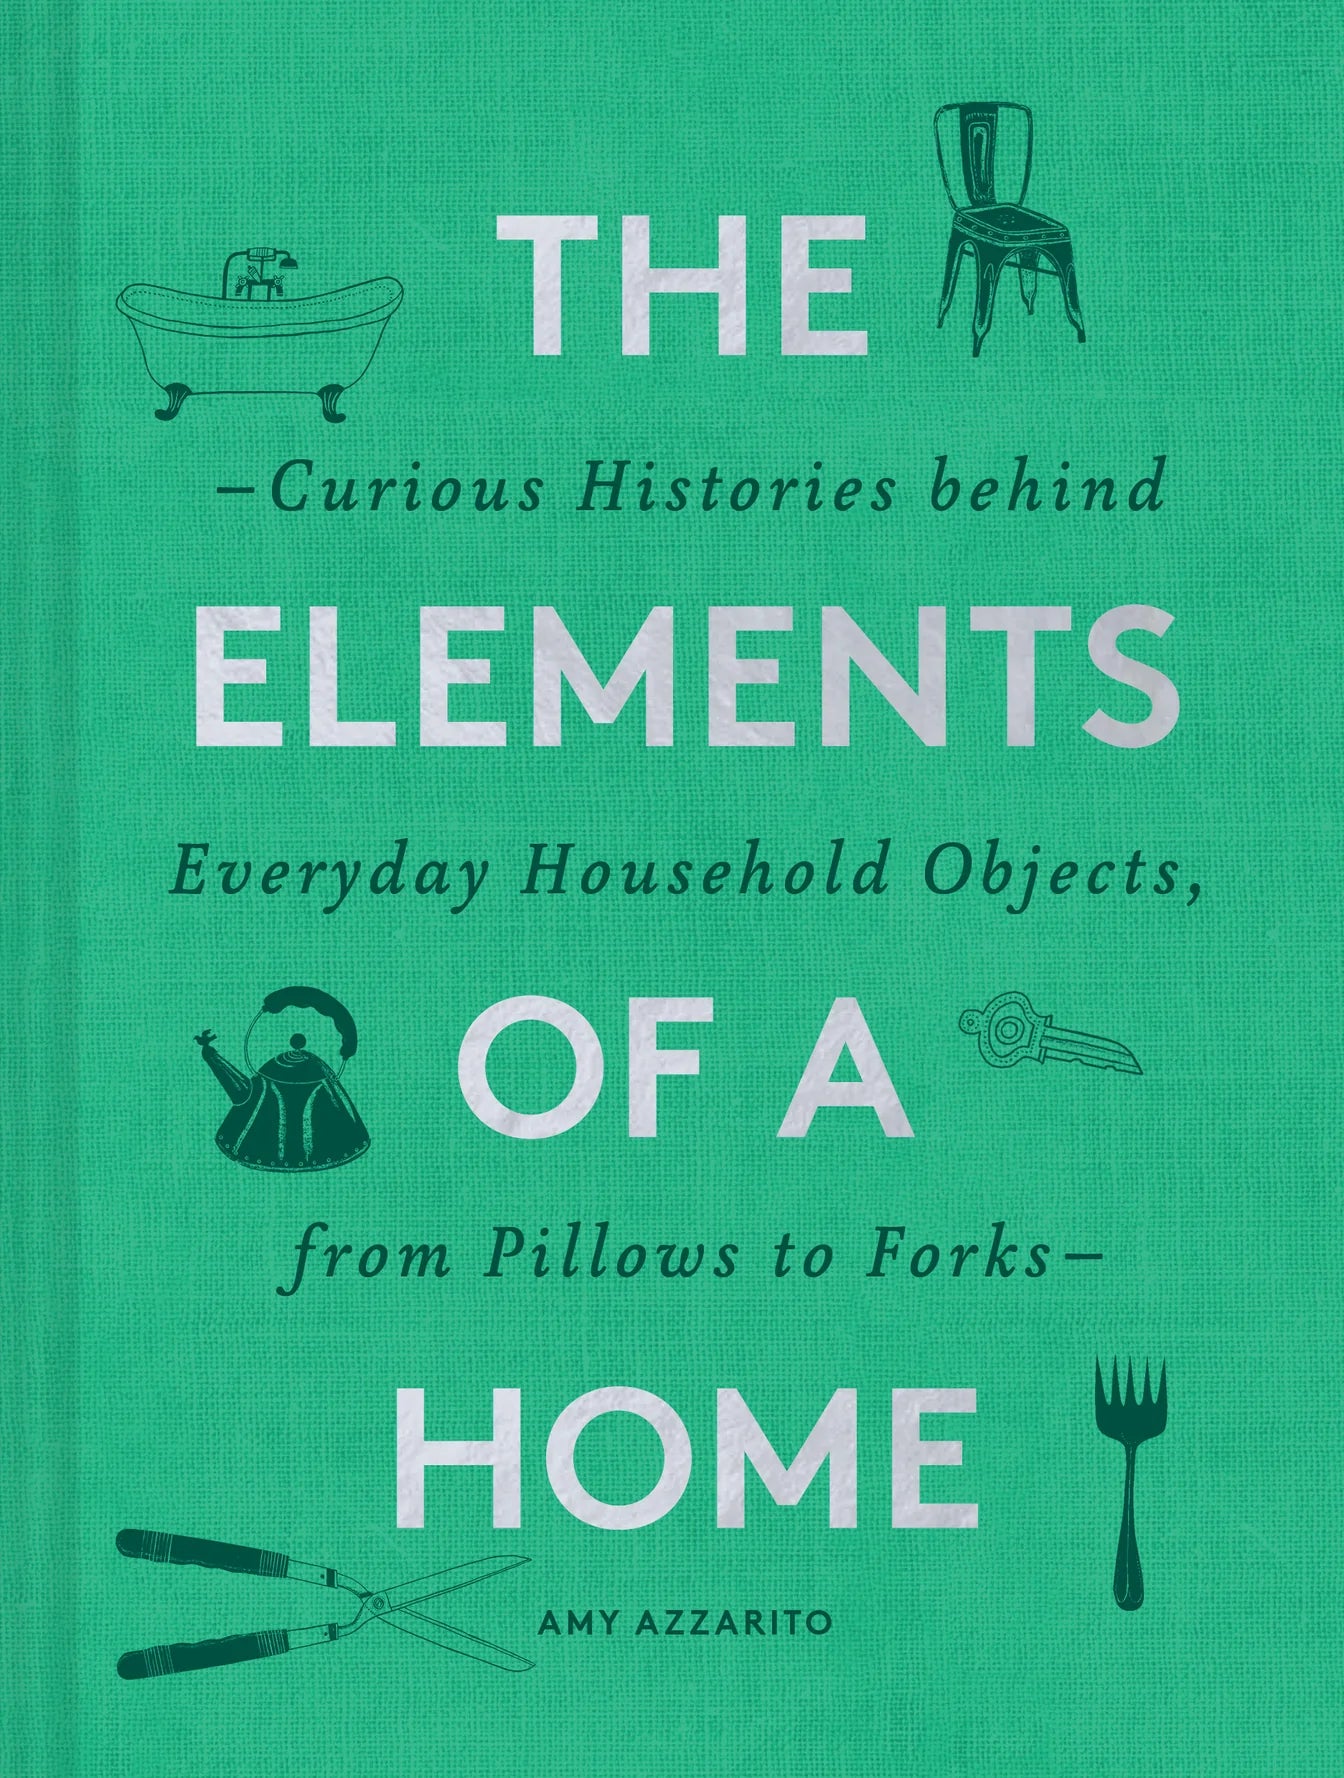 The Elements of a Home, Amy Azzarito